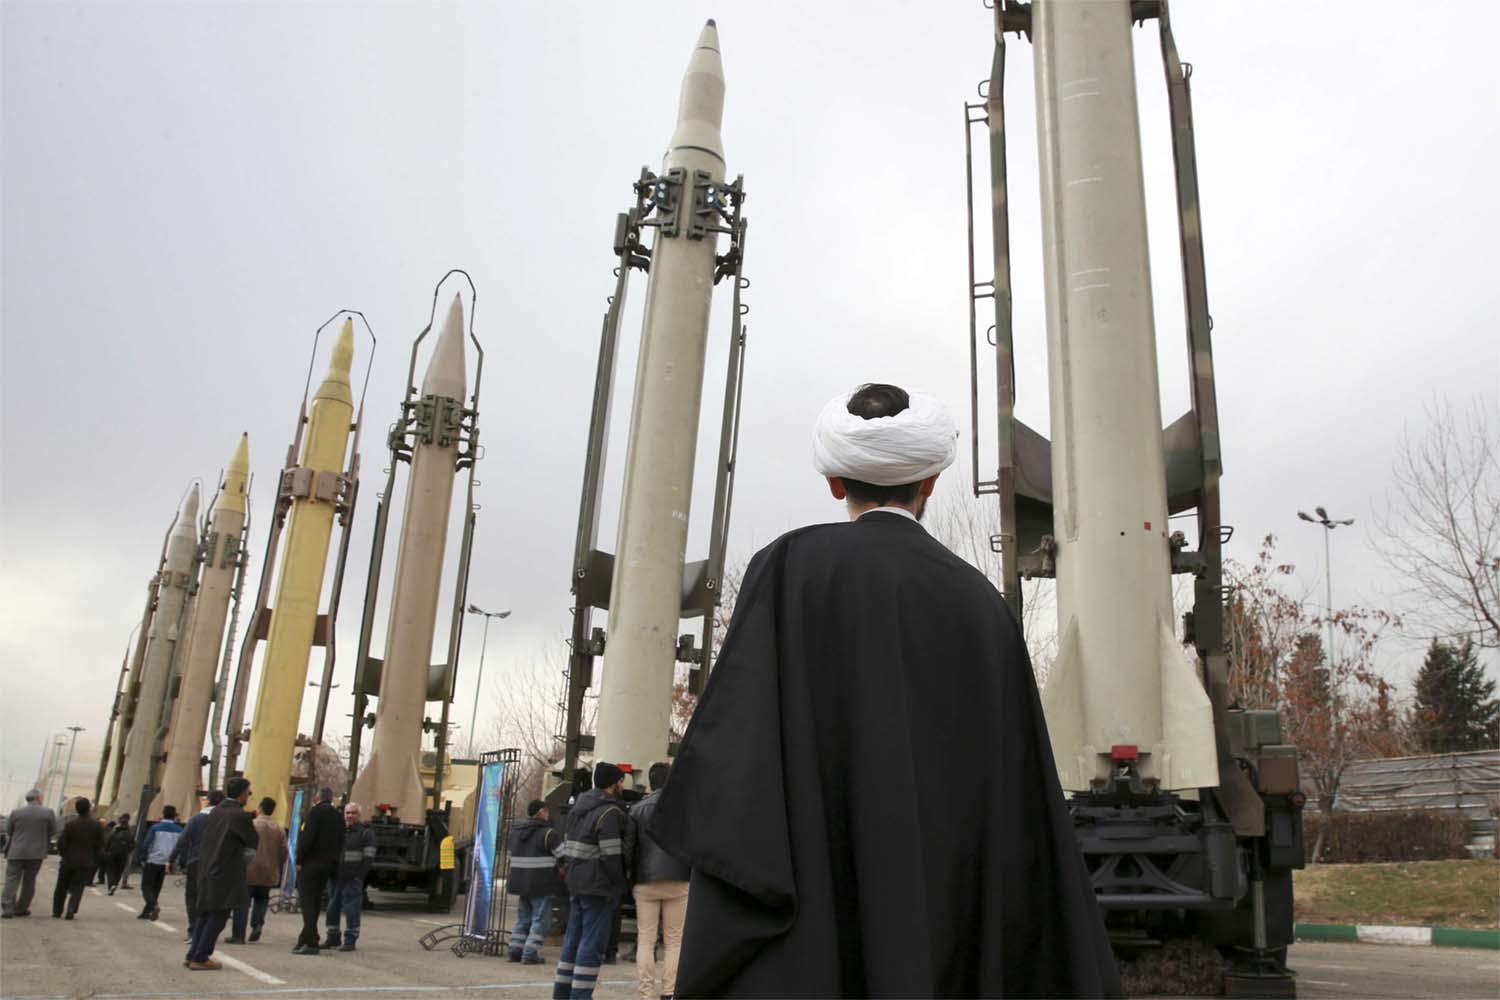 Iran's provision of around 400 missiles includes many from the Fateh-110 family of short-range ballistic weapons